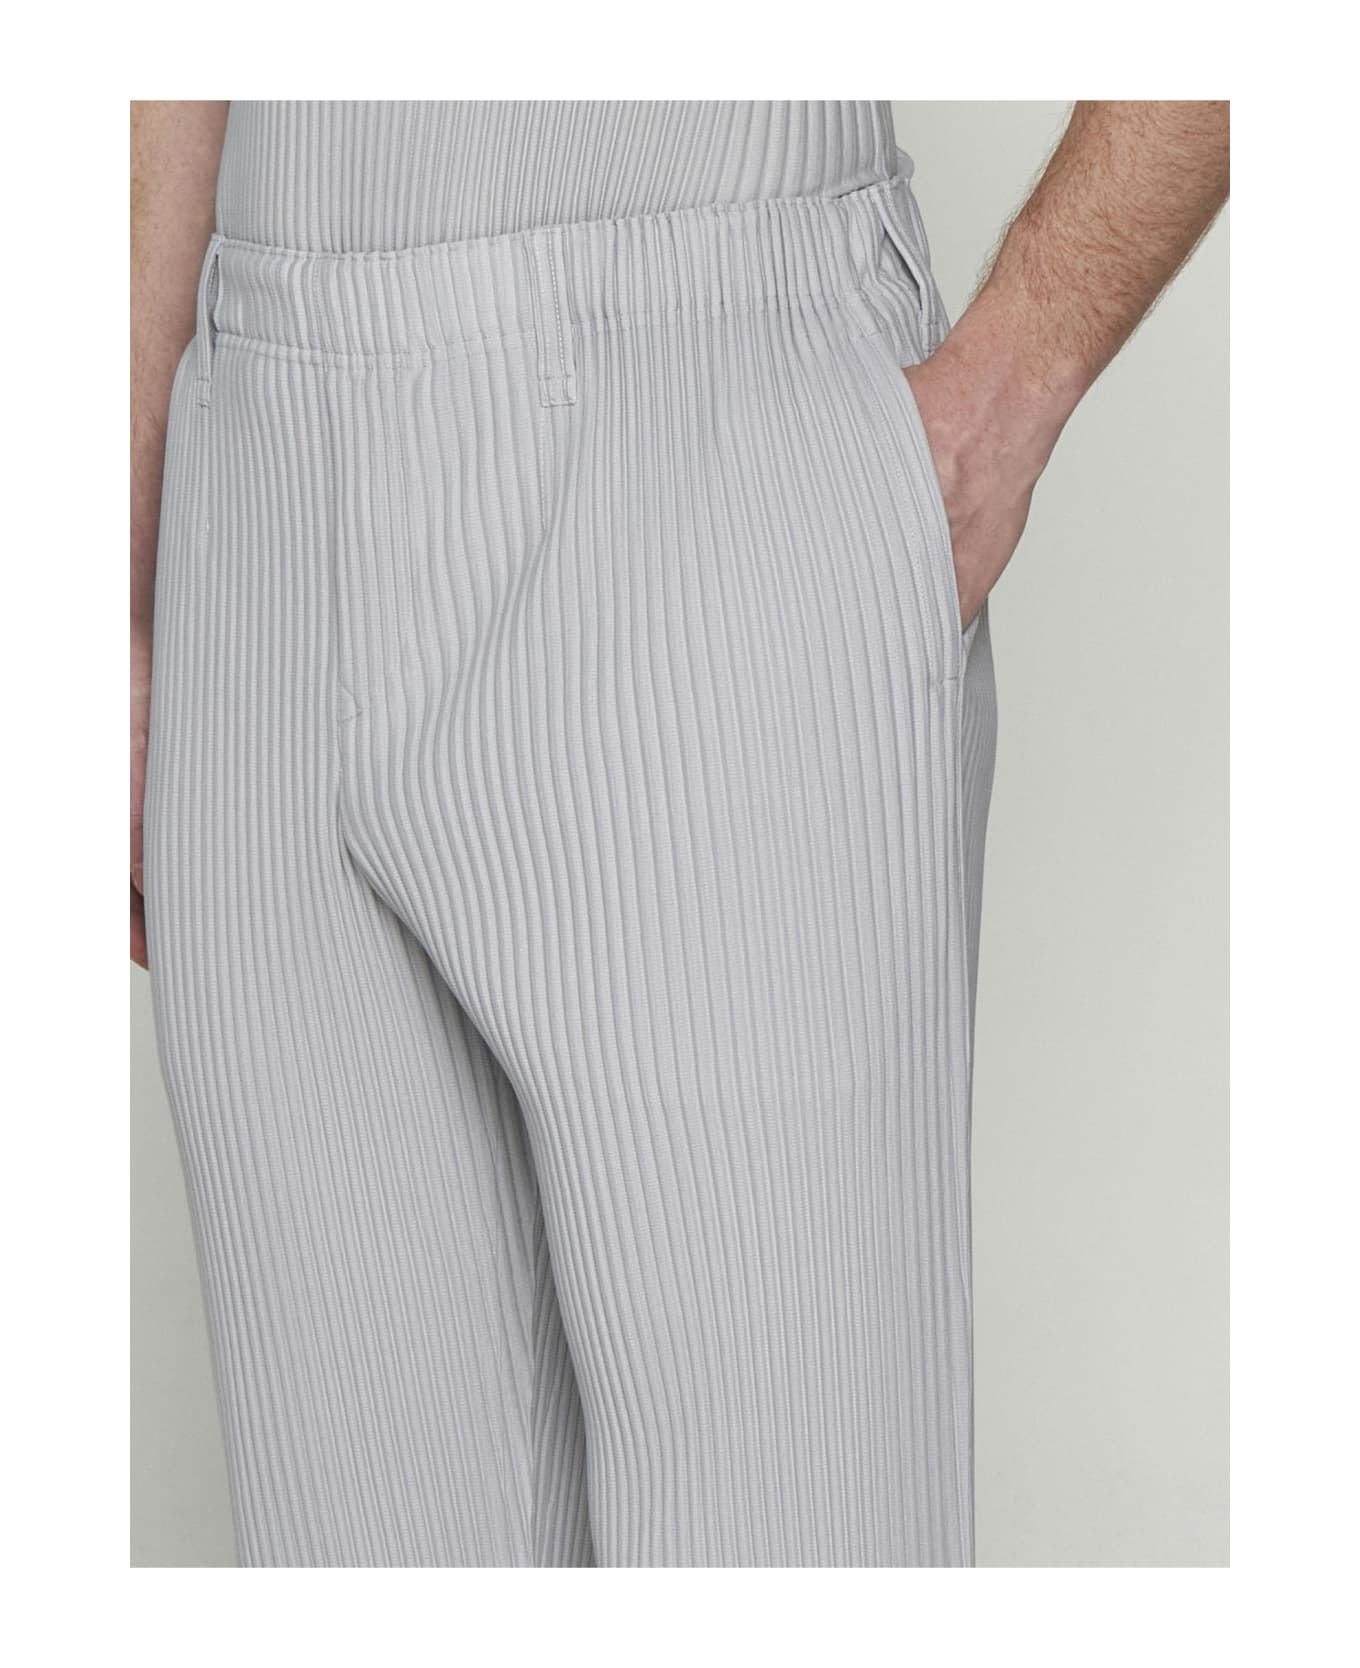 Homme Plissé Issey Miyake Pleated Fabric Trousers - Light Grey ボトムス